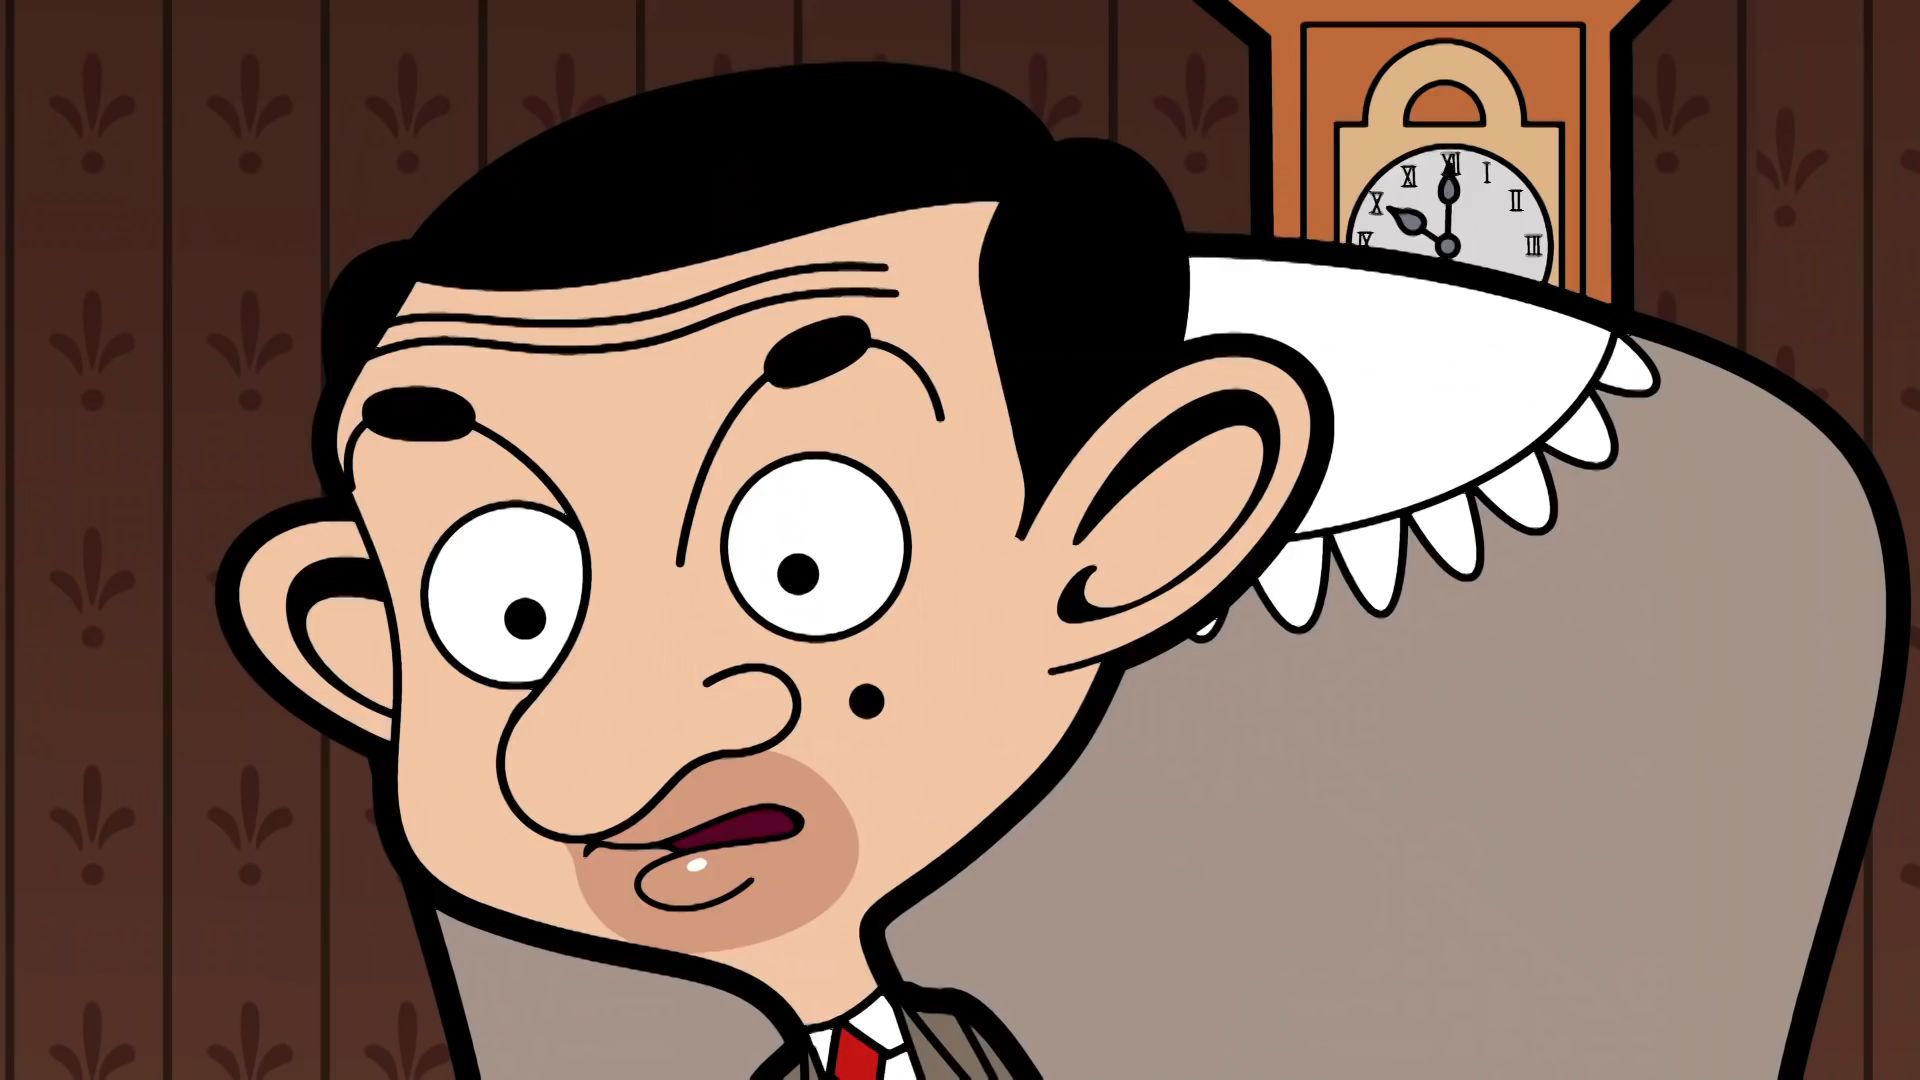 Mr Bean Shop  Personalised Gifts DVDs Soft Toys and More